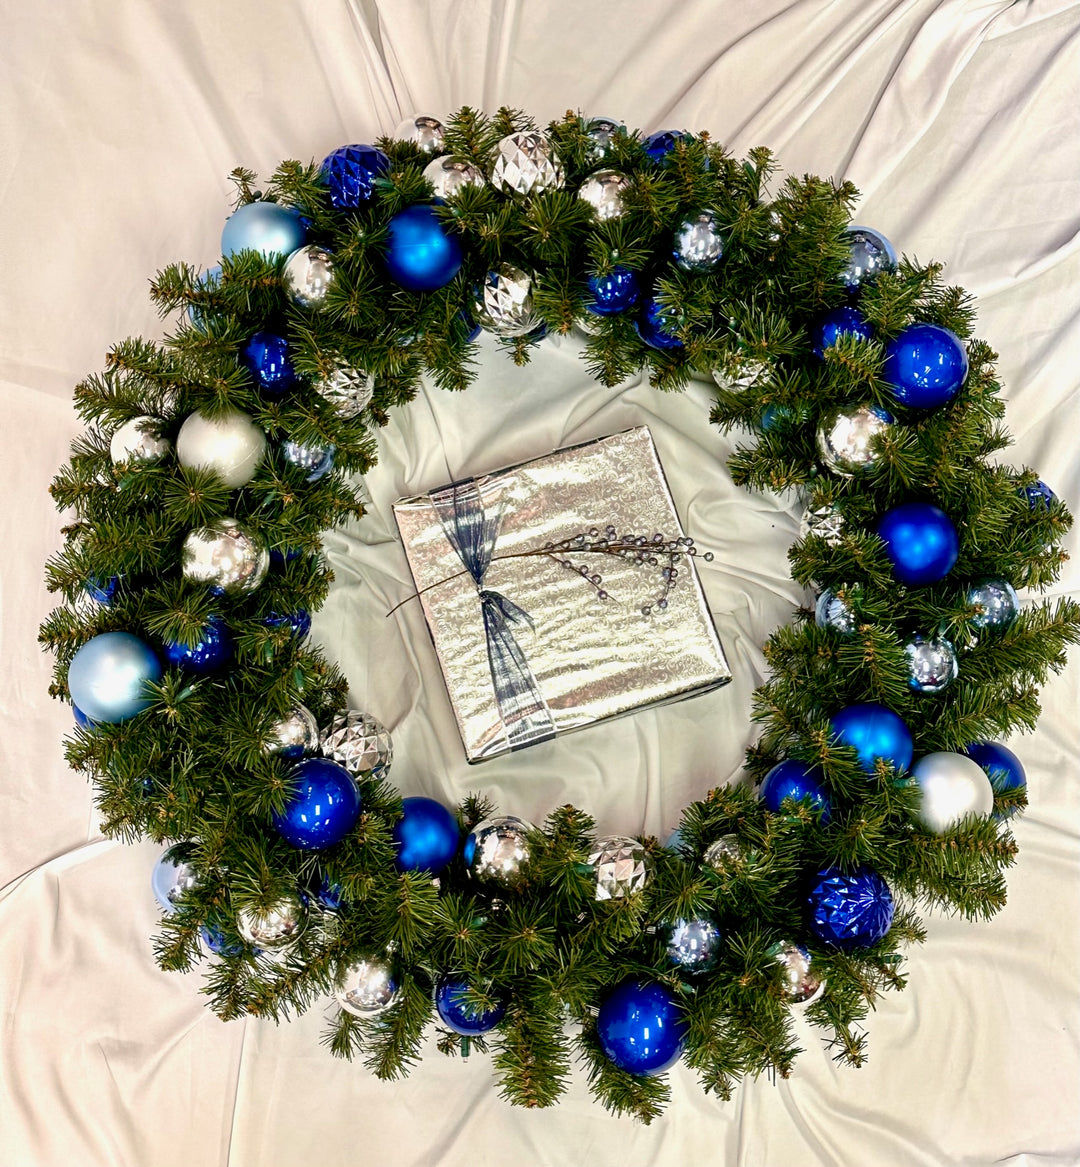 Christmas By Krebs Shatterproof Wreath Decorating Kits - ORNAMENTS ONLY - UV and Weather Resistant (Blue, Silver & White - UV, 36 Inch - 64 Ornaments)